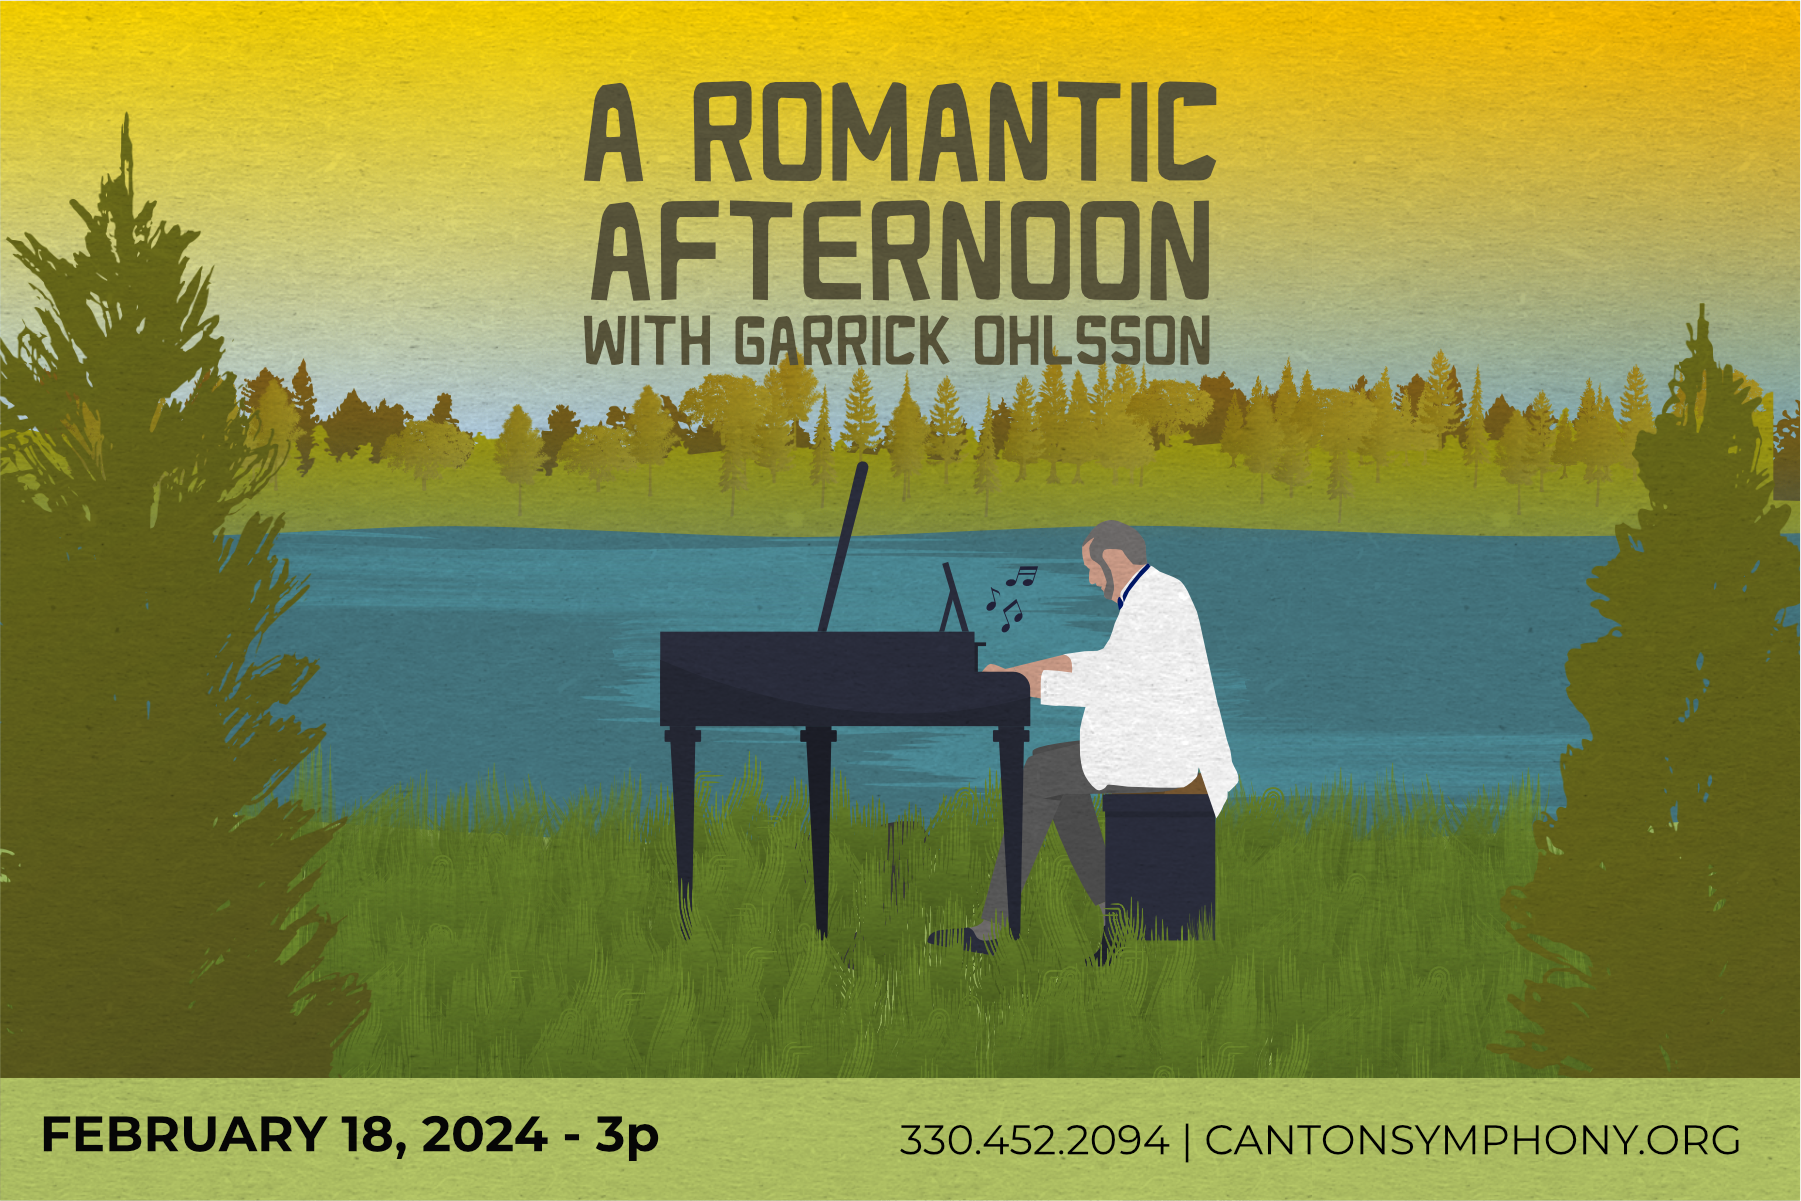 A graphic depicting world famous pianist, Garrick Ohlsson, playing a piano in the woods next to a beautiful lake. "A Romantic Afternoon with Garrick Ohlsson" is displayed in a simple font at the top of the graphic.